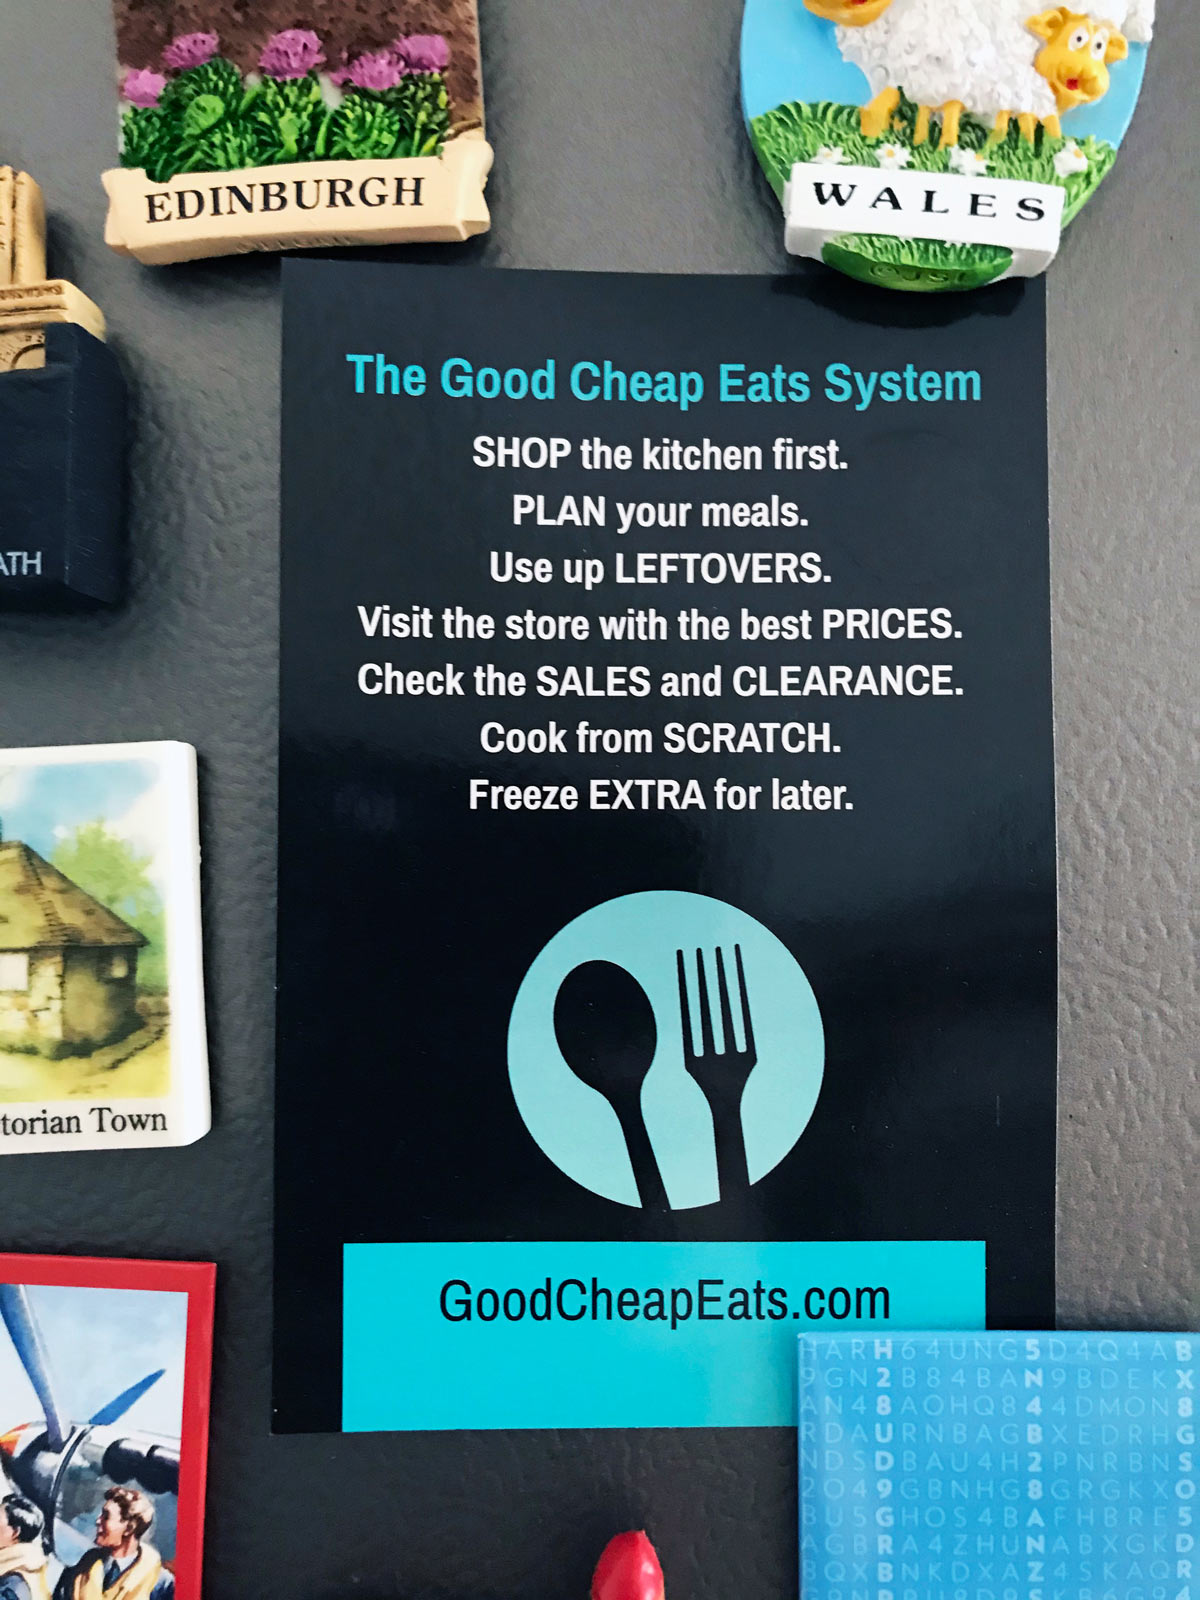 printed card of good cheap eats system on fridge with magnets.